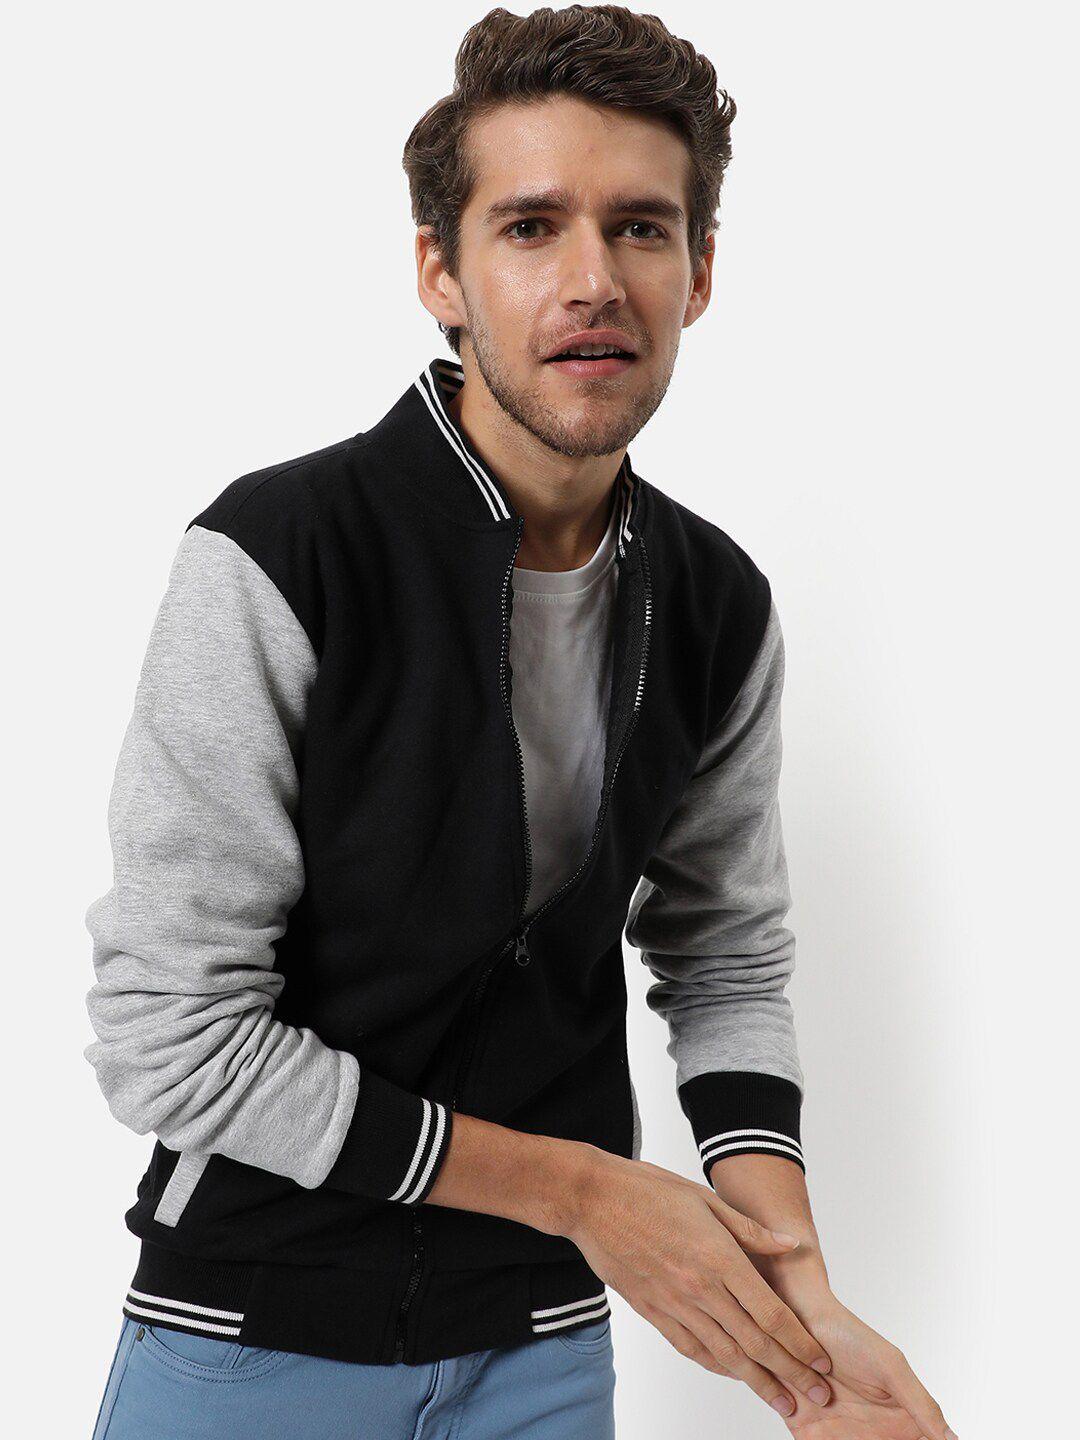 campus-sutra-men-black-geometric-checked-windcheater-outdoor-tailored-jacket-with-embroidered